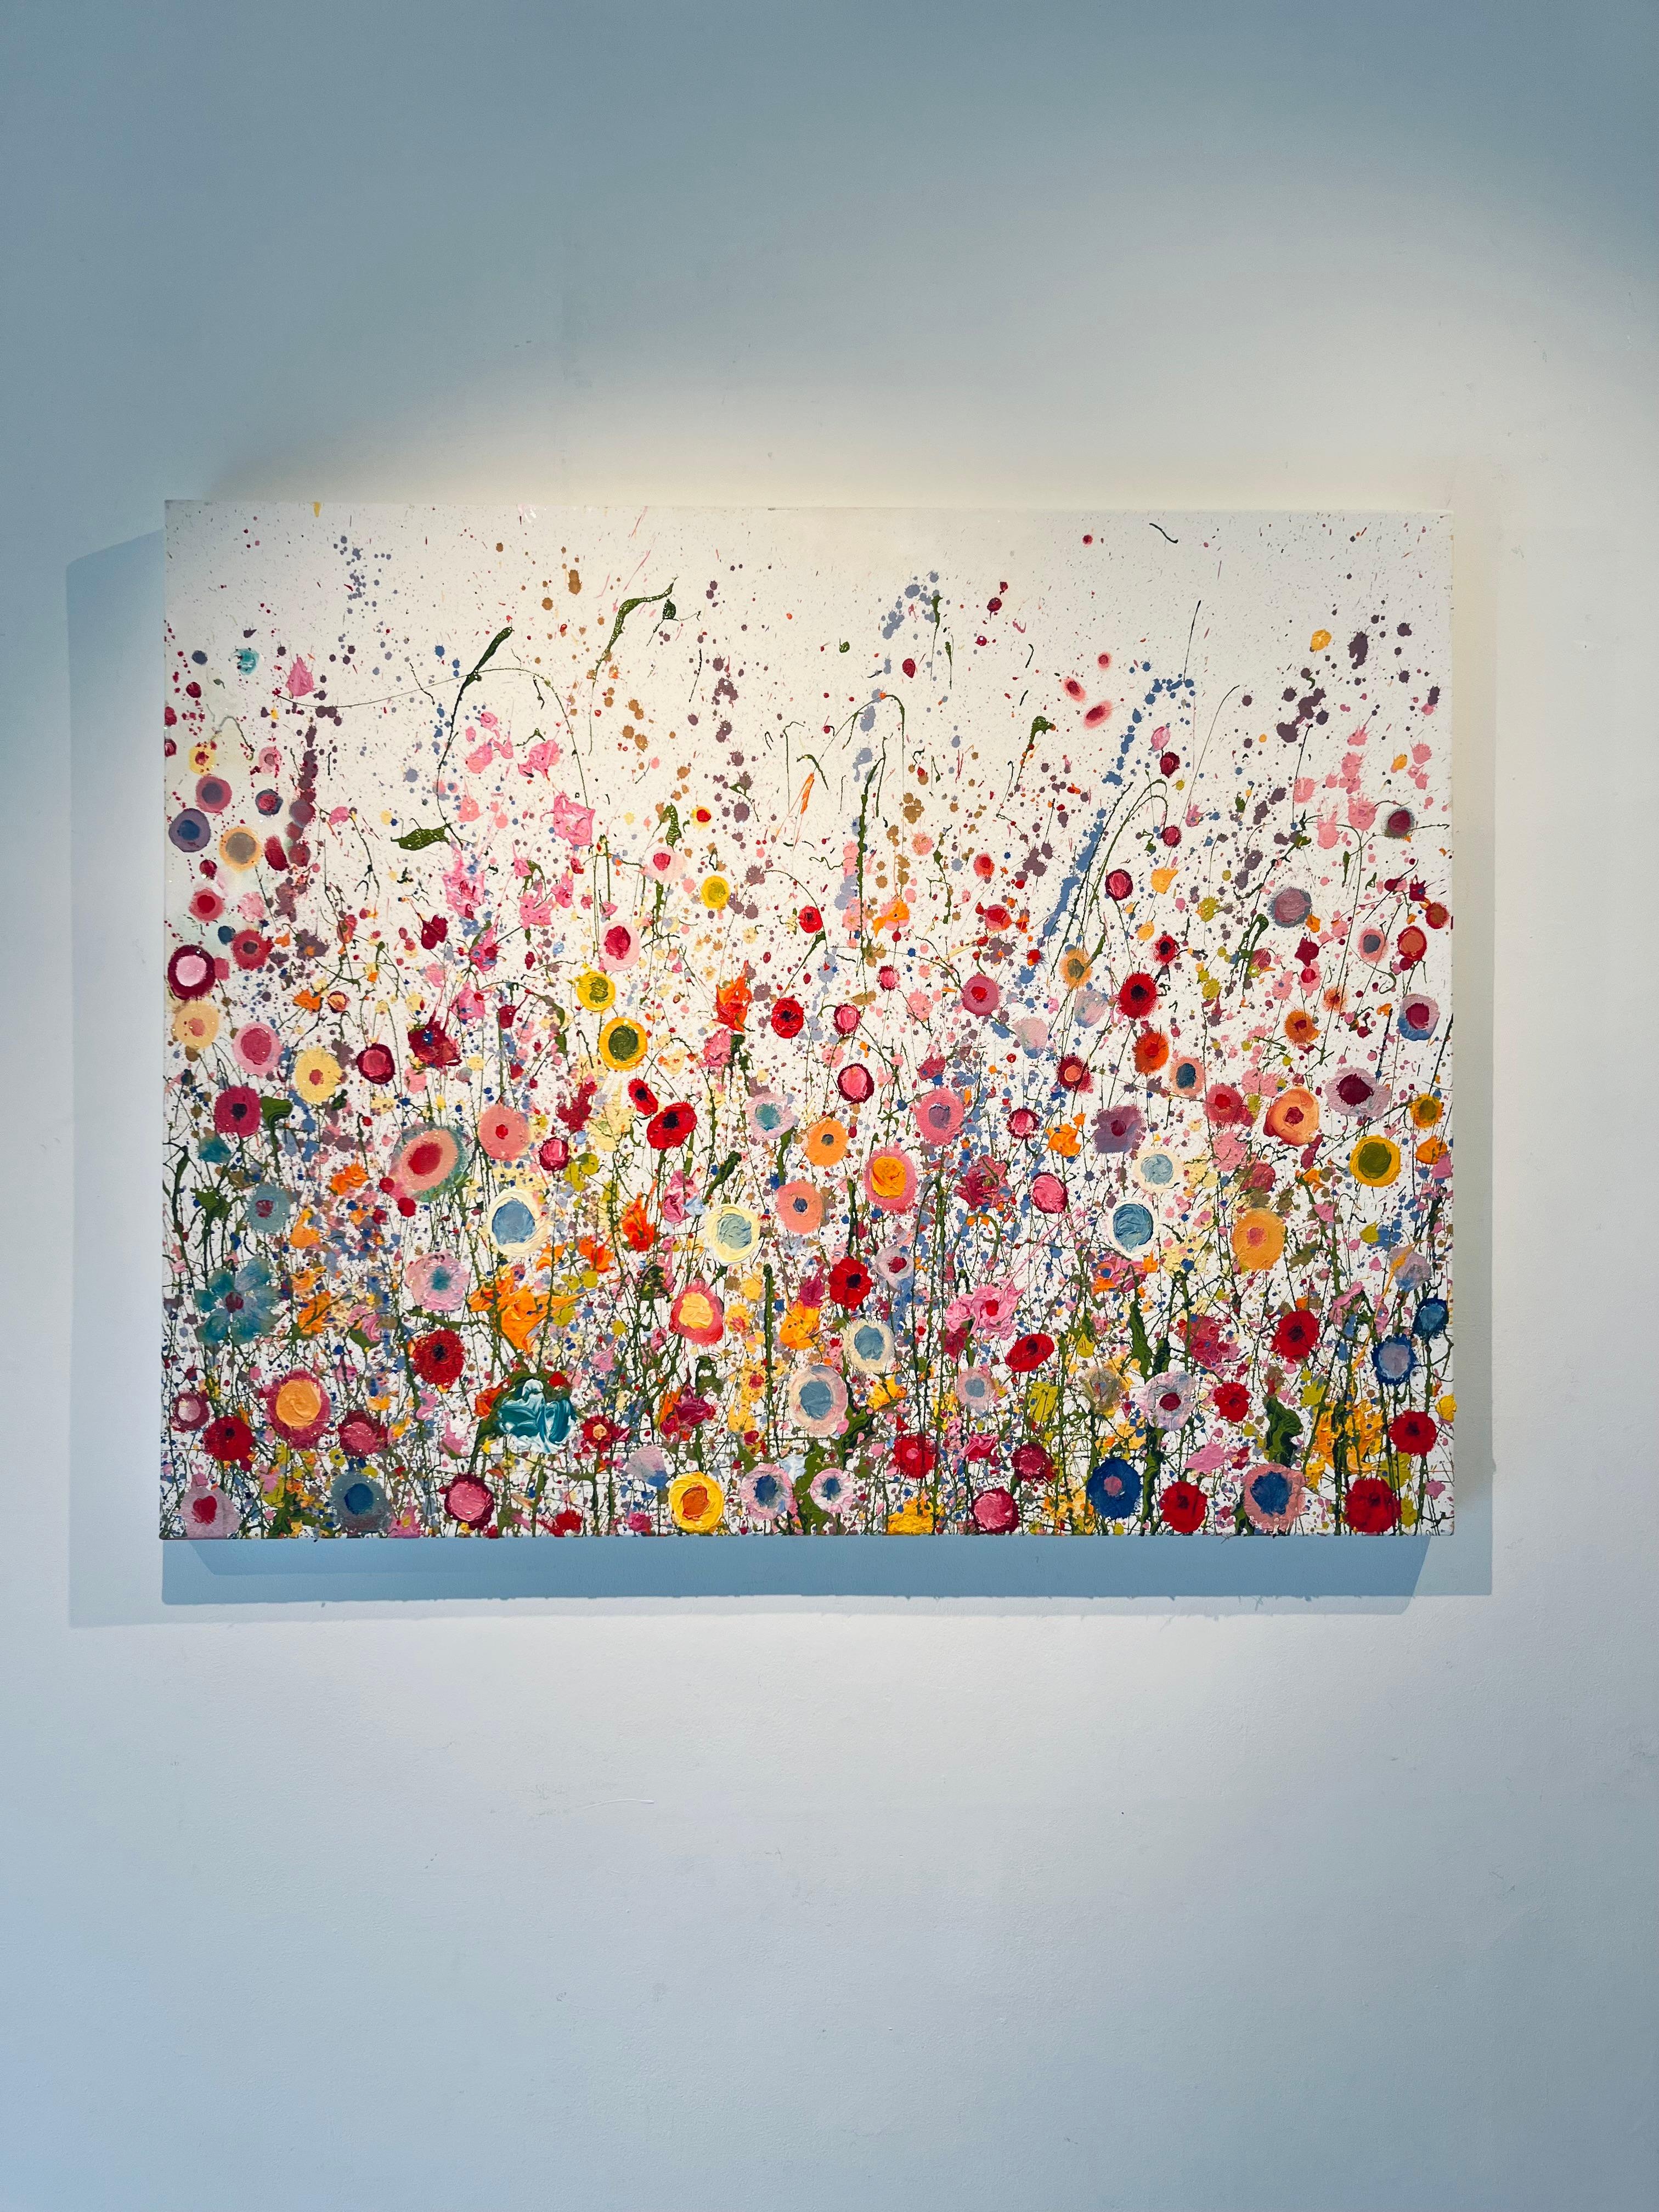 I Love You With All My Heart- original floral abstract painting contemporary art - Painting by Yvonne Coomber